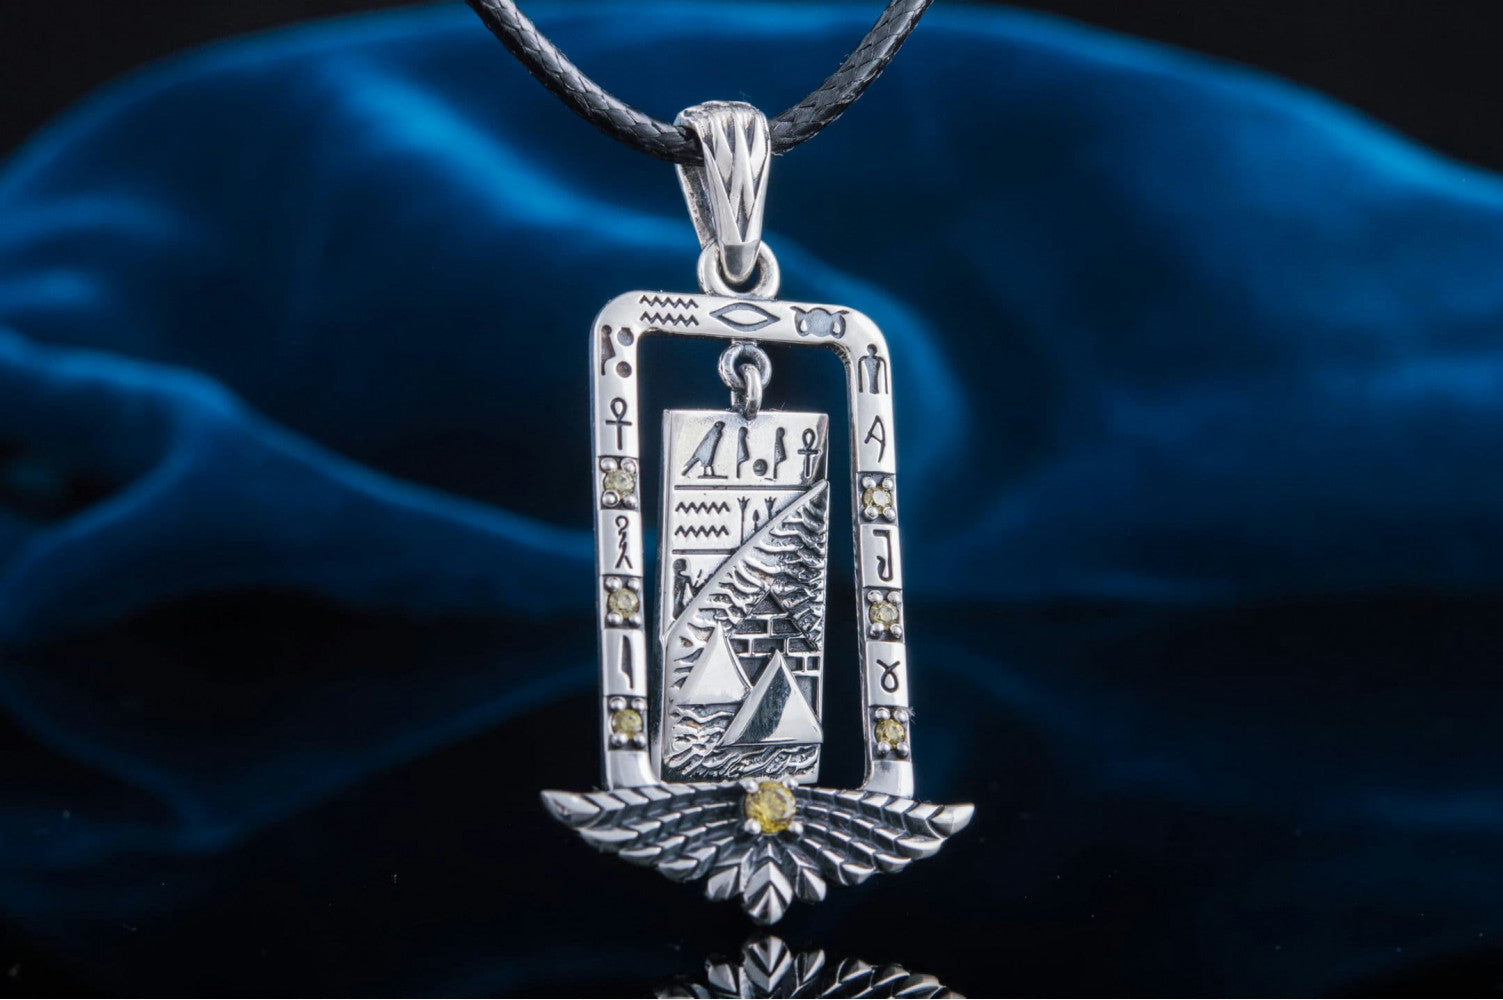 Egypt Pendant with Piramids and Cubic Zirconia Sterling Silver Jewelry - vikingworkshop